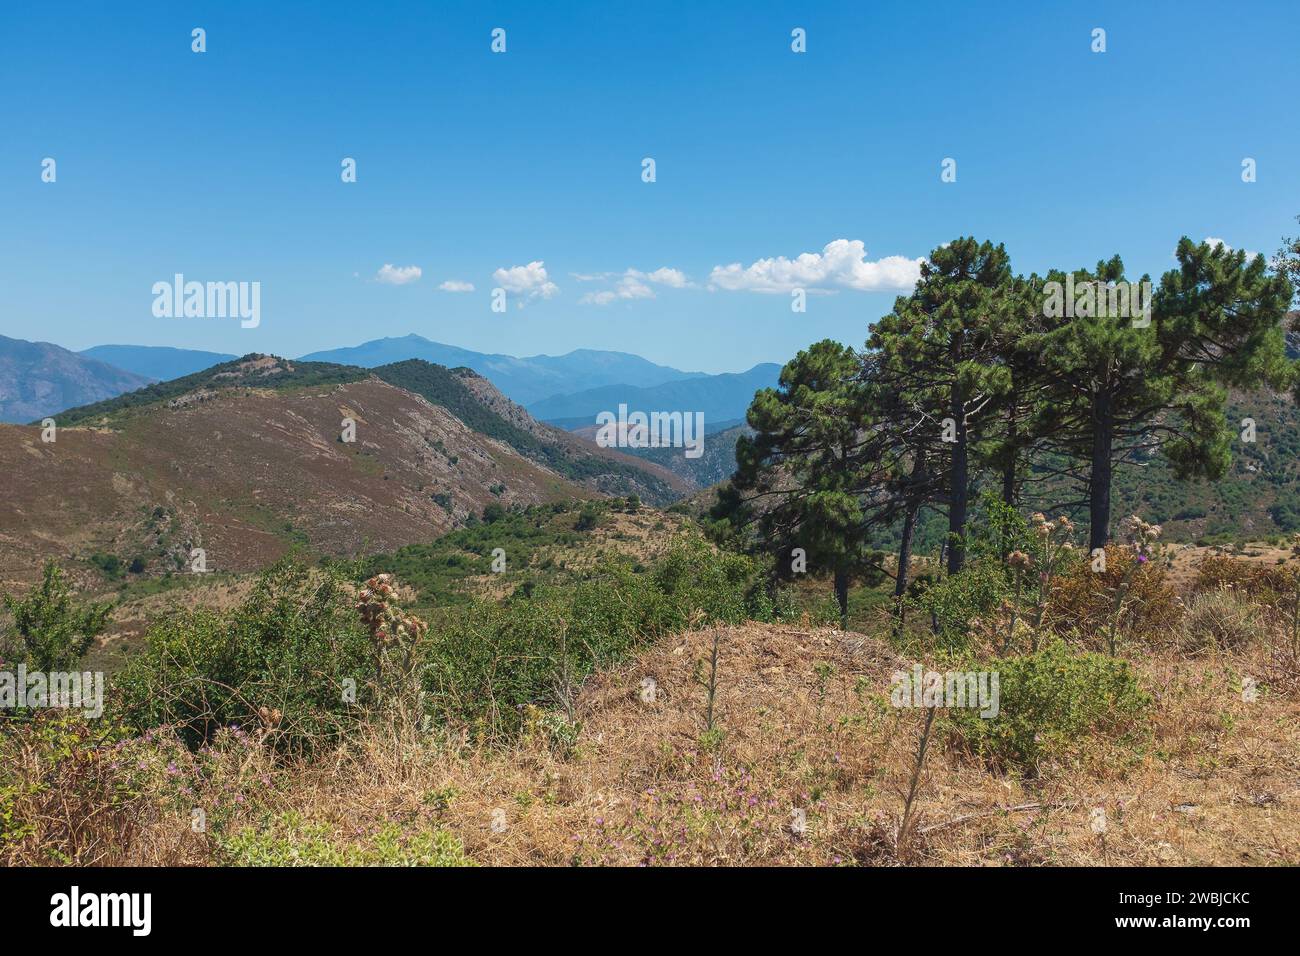 Balagna, Corsica. Typical hilly landscape in Balagna, with its rich maquis and Corsican pines (Pinus nigra var. corsicana) Stock Photo